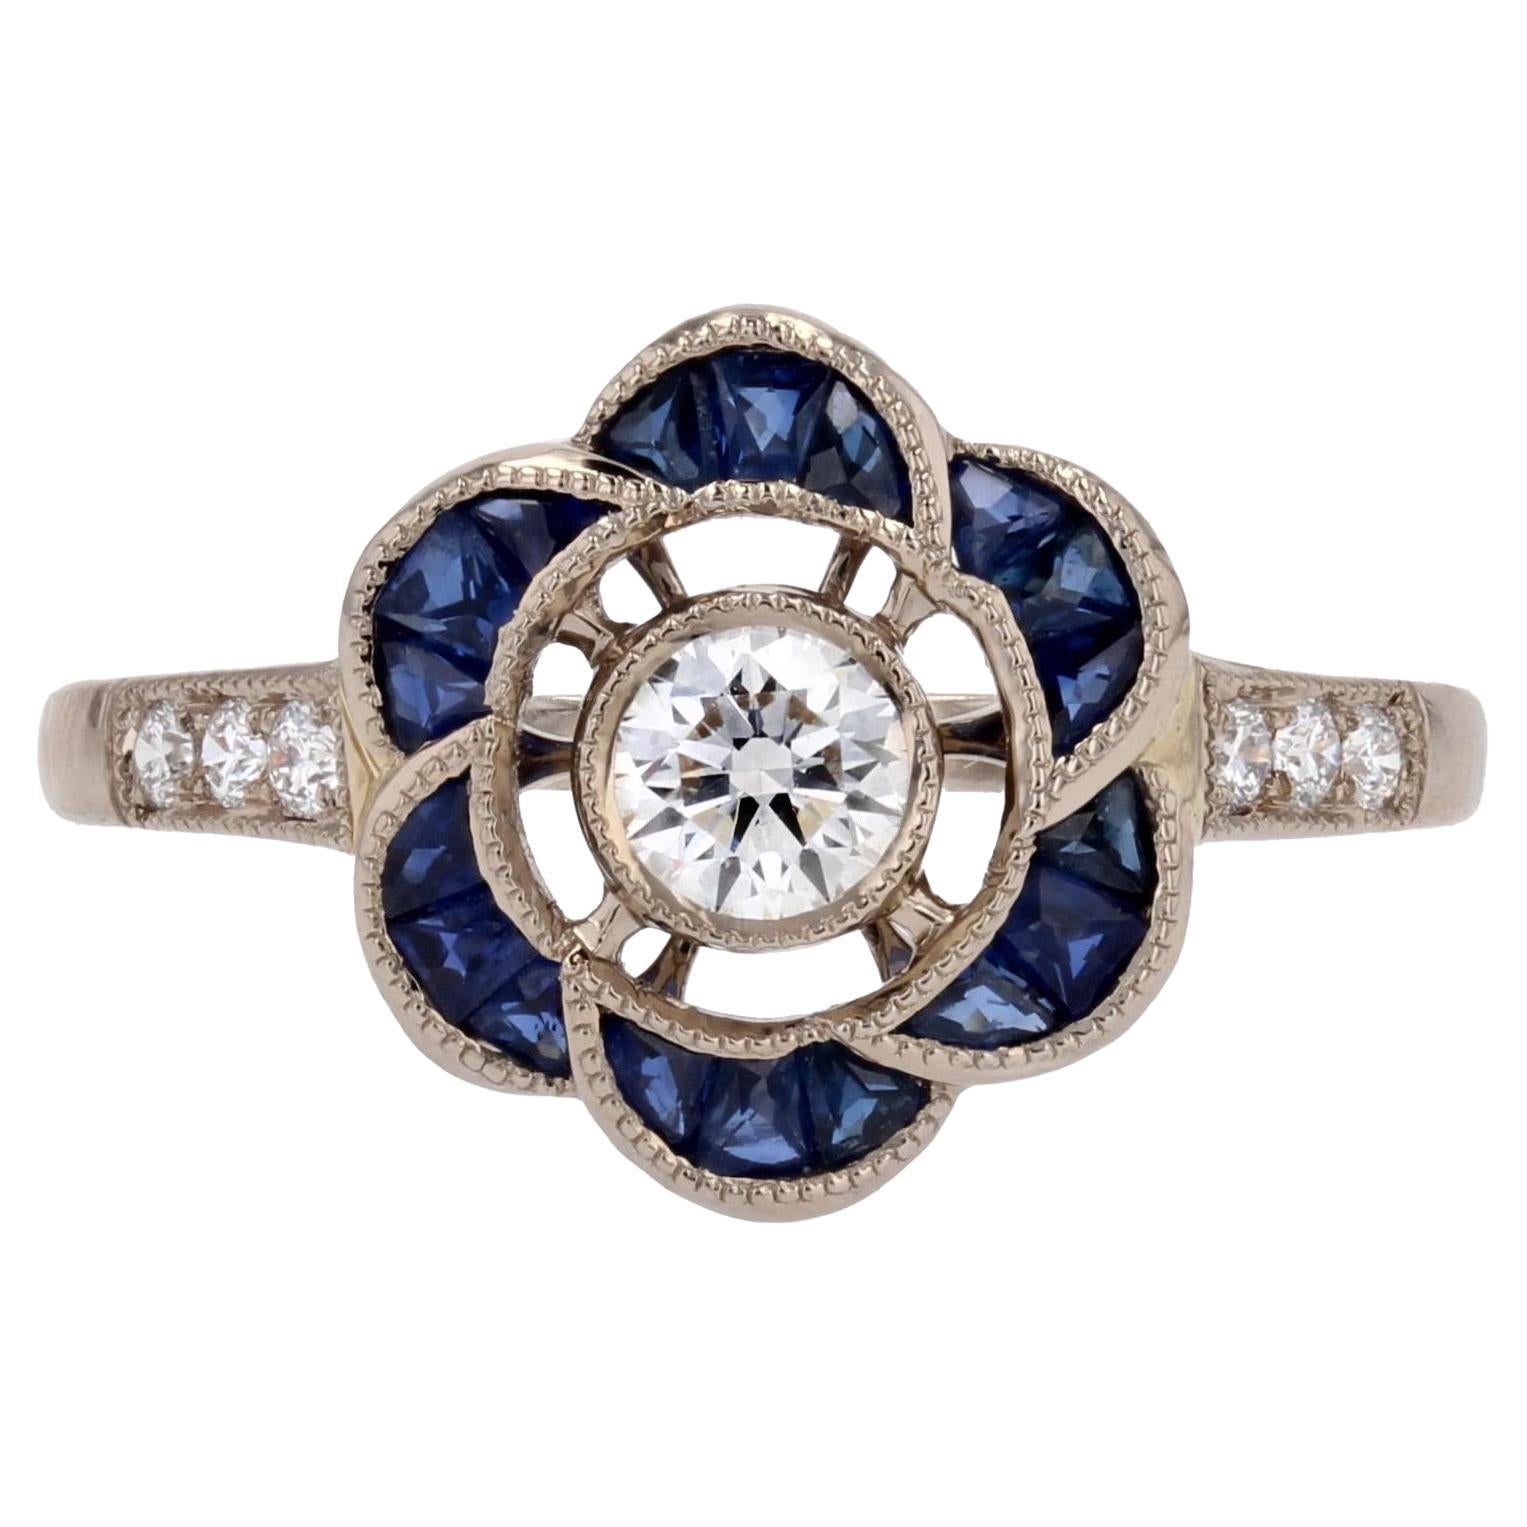 New Art Deco Style Calibrated Sapphires Diamonds 18 K White Gold Flower Ring For Sale